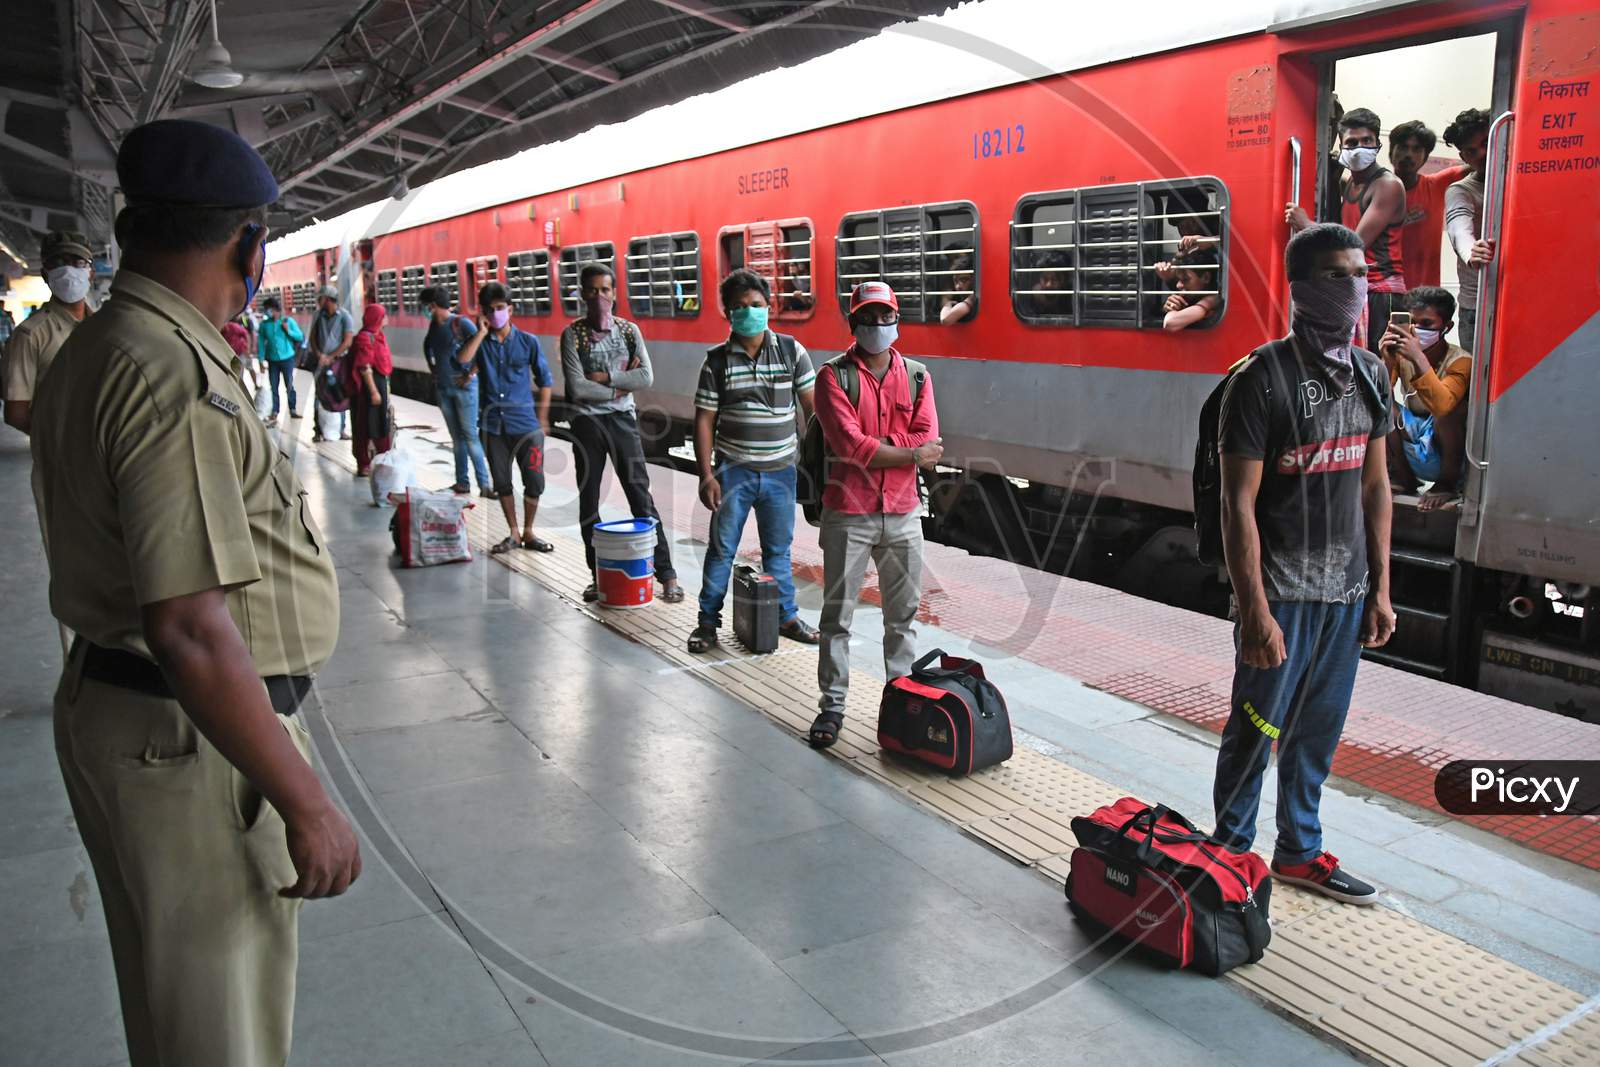 Migrant workers stranded due to lockdown in the emergence of Novel Coronavirus (COVID-19) have returned to Burdwan (Home Town) on a 'Shramik Special' train from Chennai.